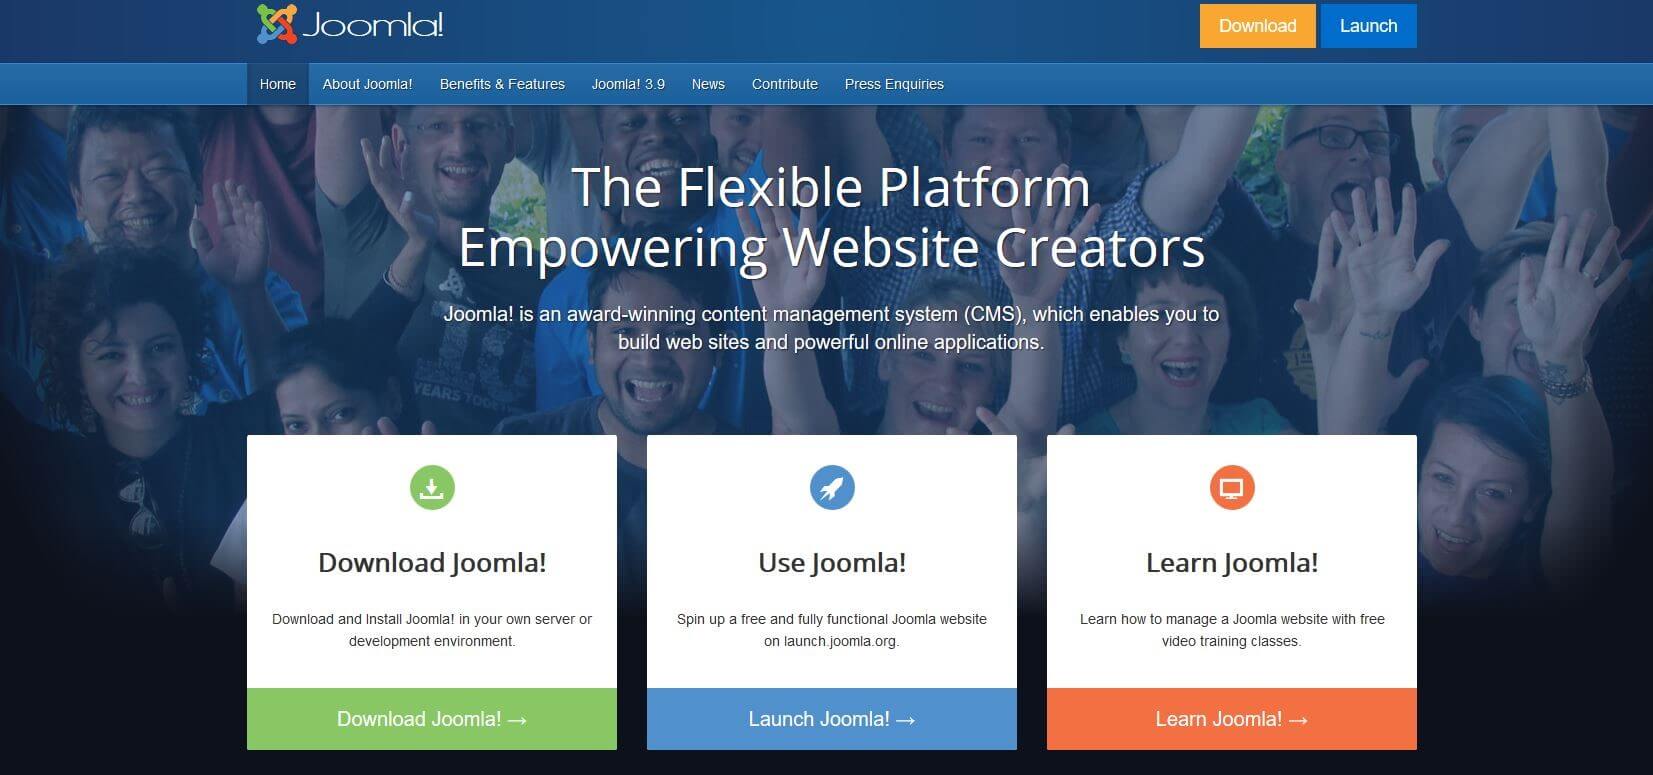 Joomla! website with option to download the installation files